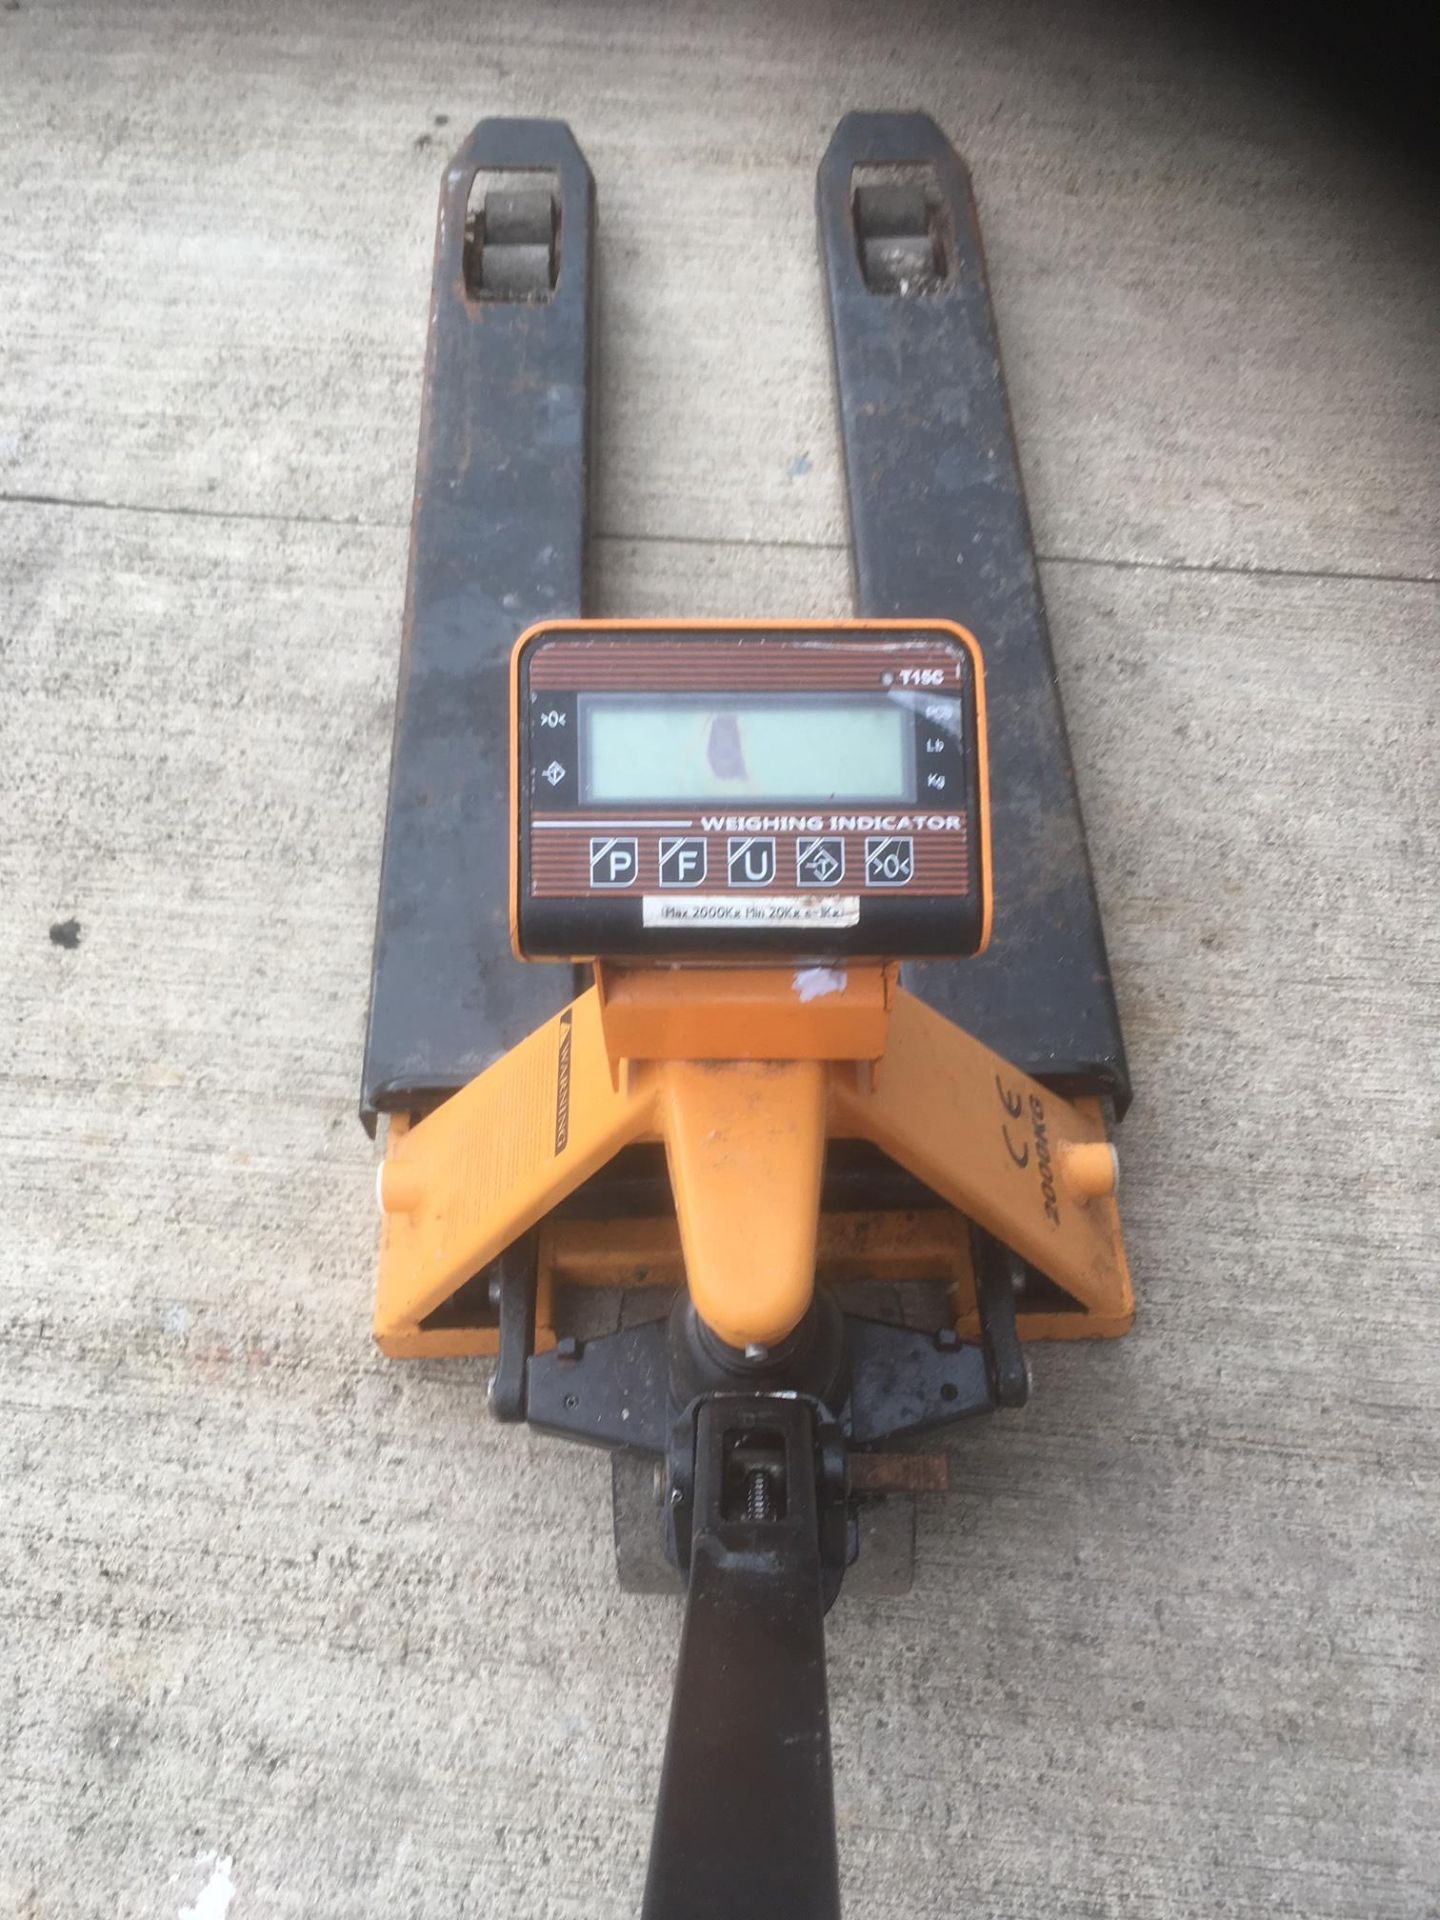 Weigh scale hand pallet truck - 2000kg lift capacity - Image 2 of 2